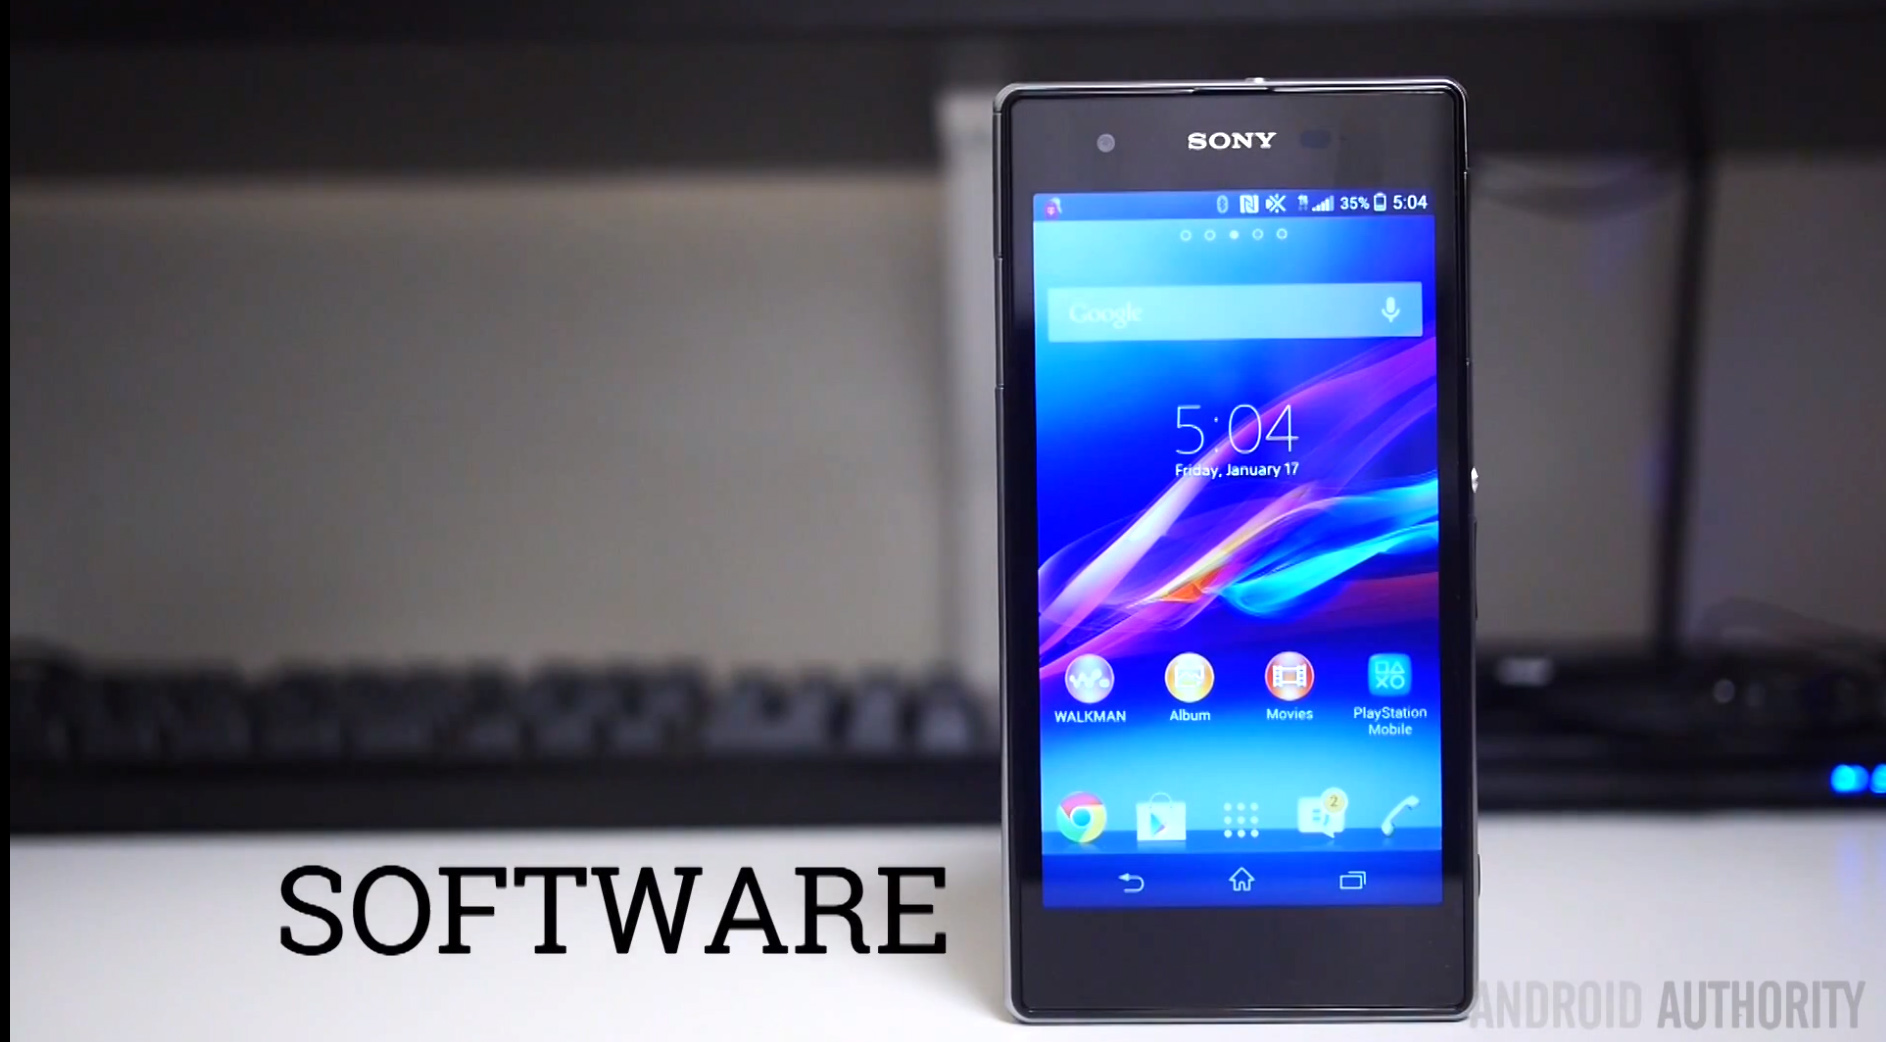 Sony Xperia Z1s Software Android 4.3